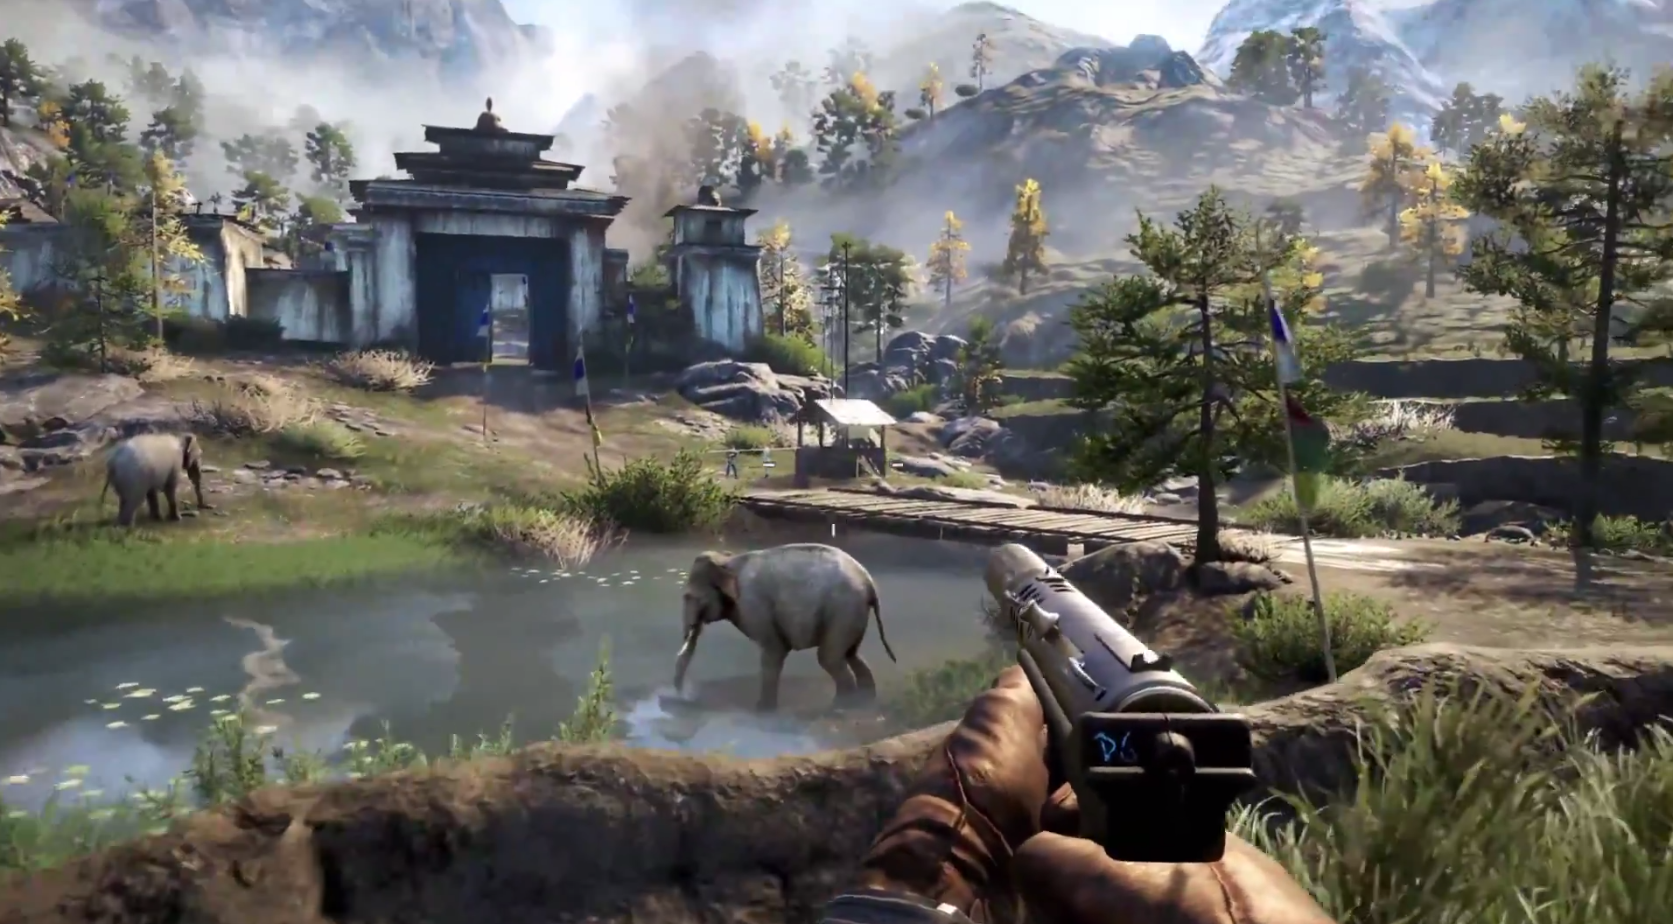 far cry 4 patch 1.4 crack chomikuj